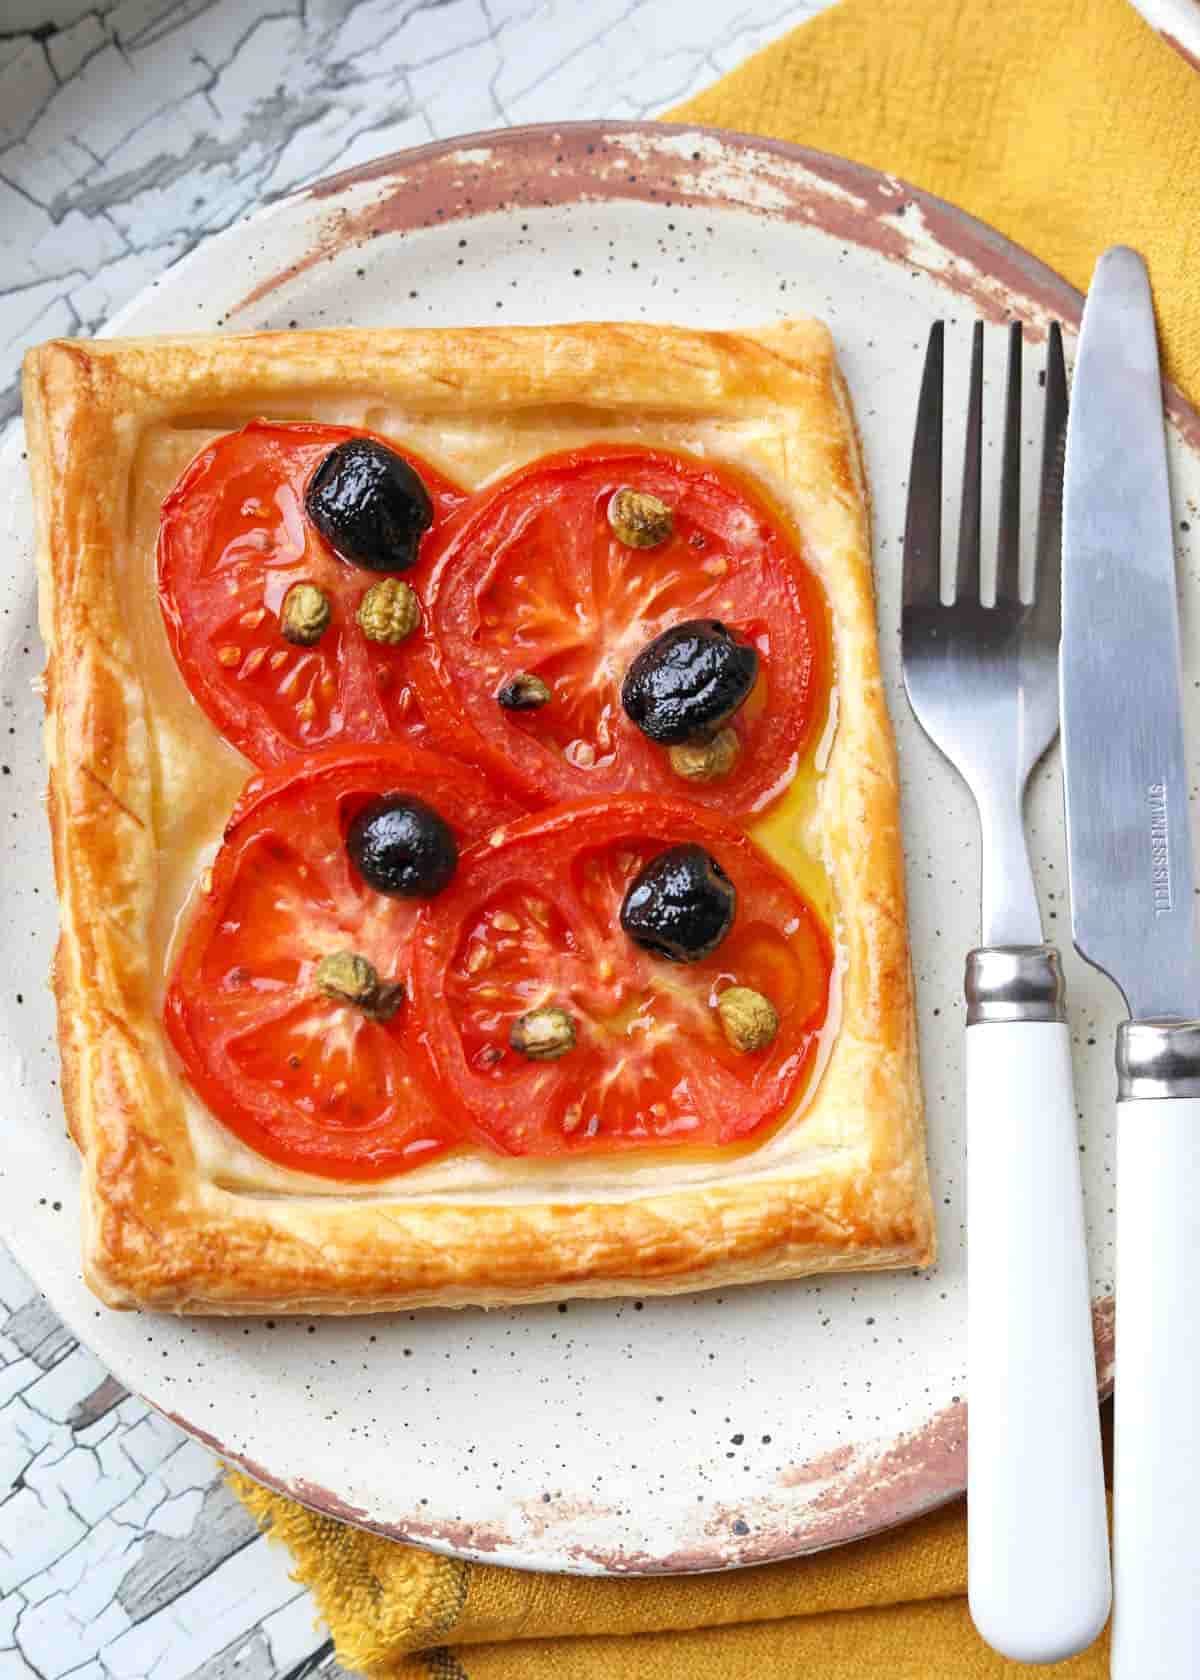 Tomato Tart with olives on plate